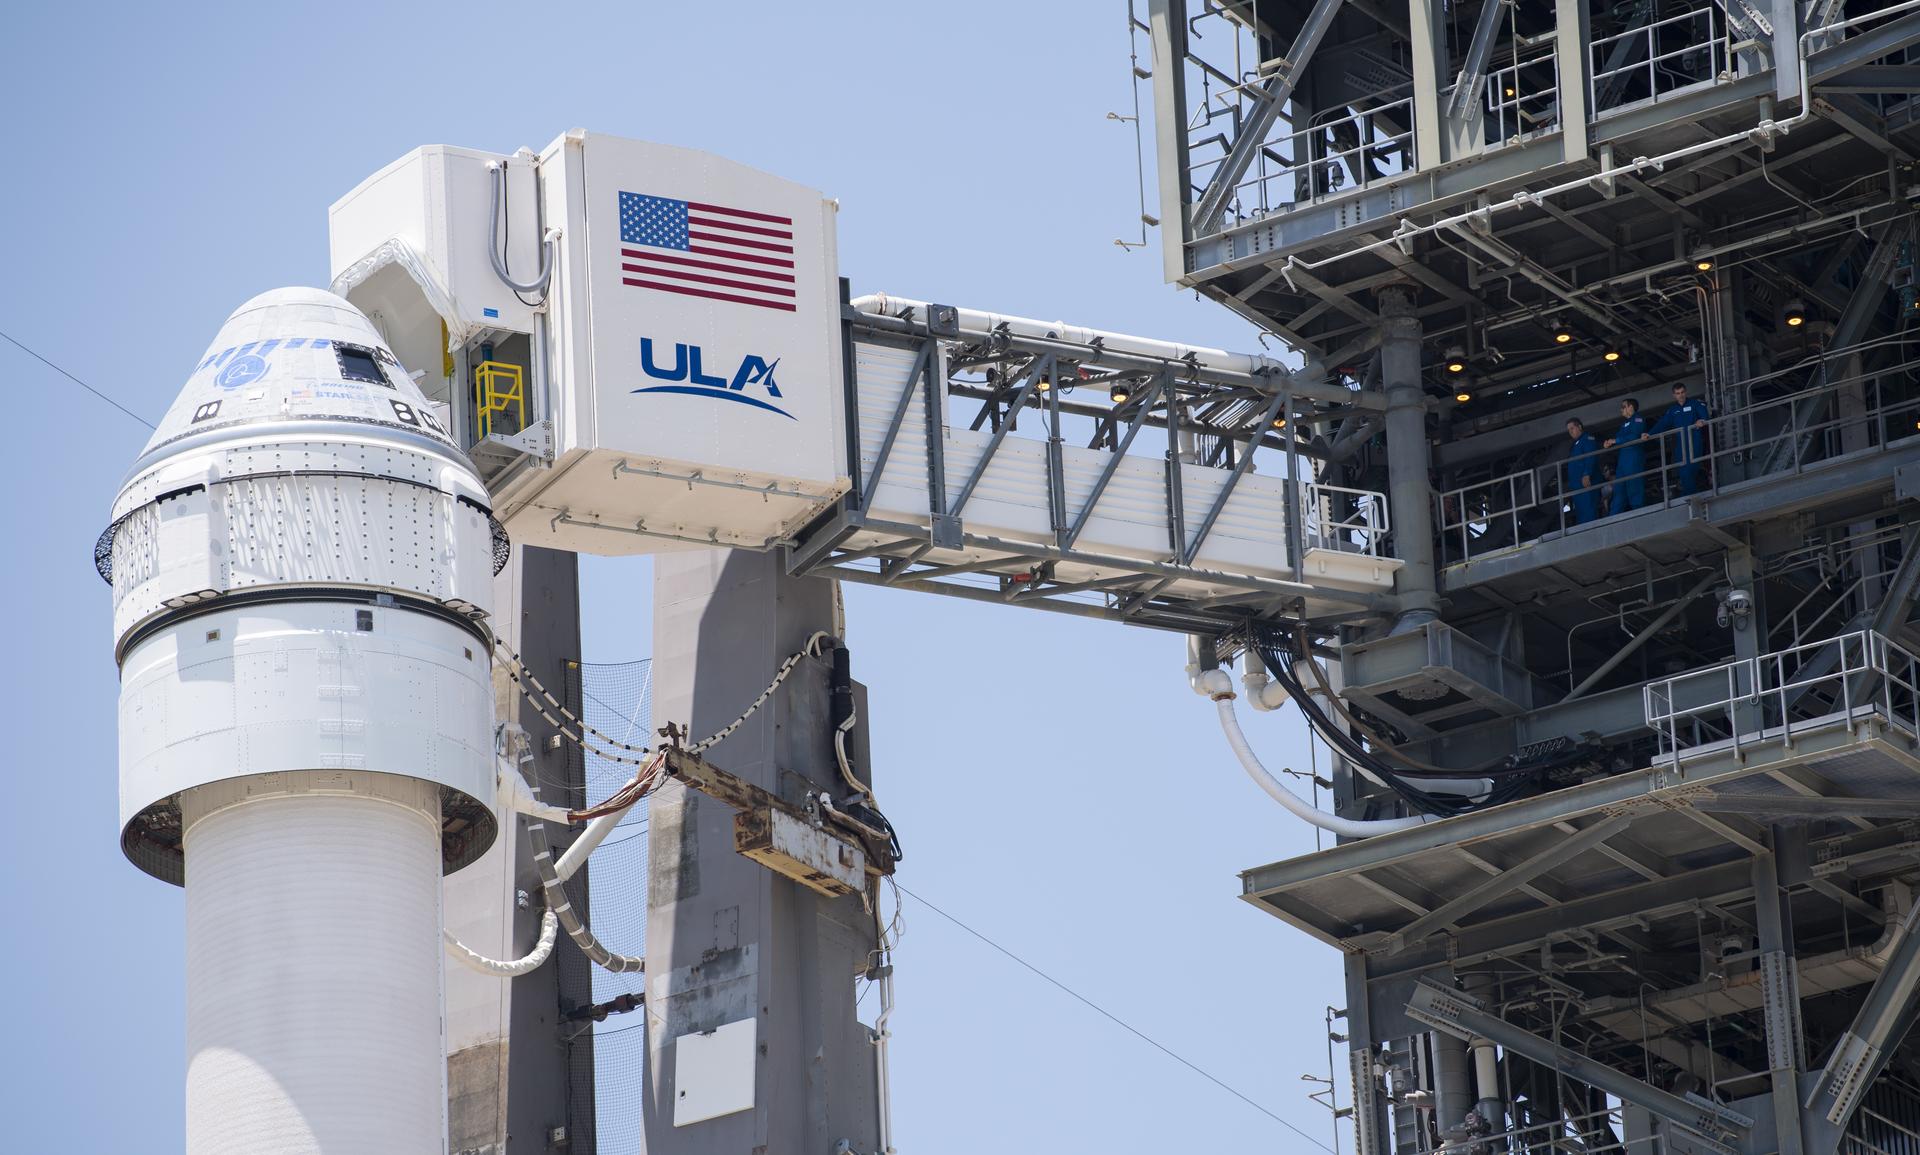 The crew access arm is seen as it swings into position for Boeing’s CST-100 Starliner spacecraft atop a United Launch Alliance Atlas V rocket at the launch pad at Space Launch Complex 41 ahead of the Orbital Flight Test-2 mission.